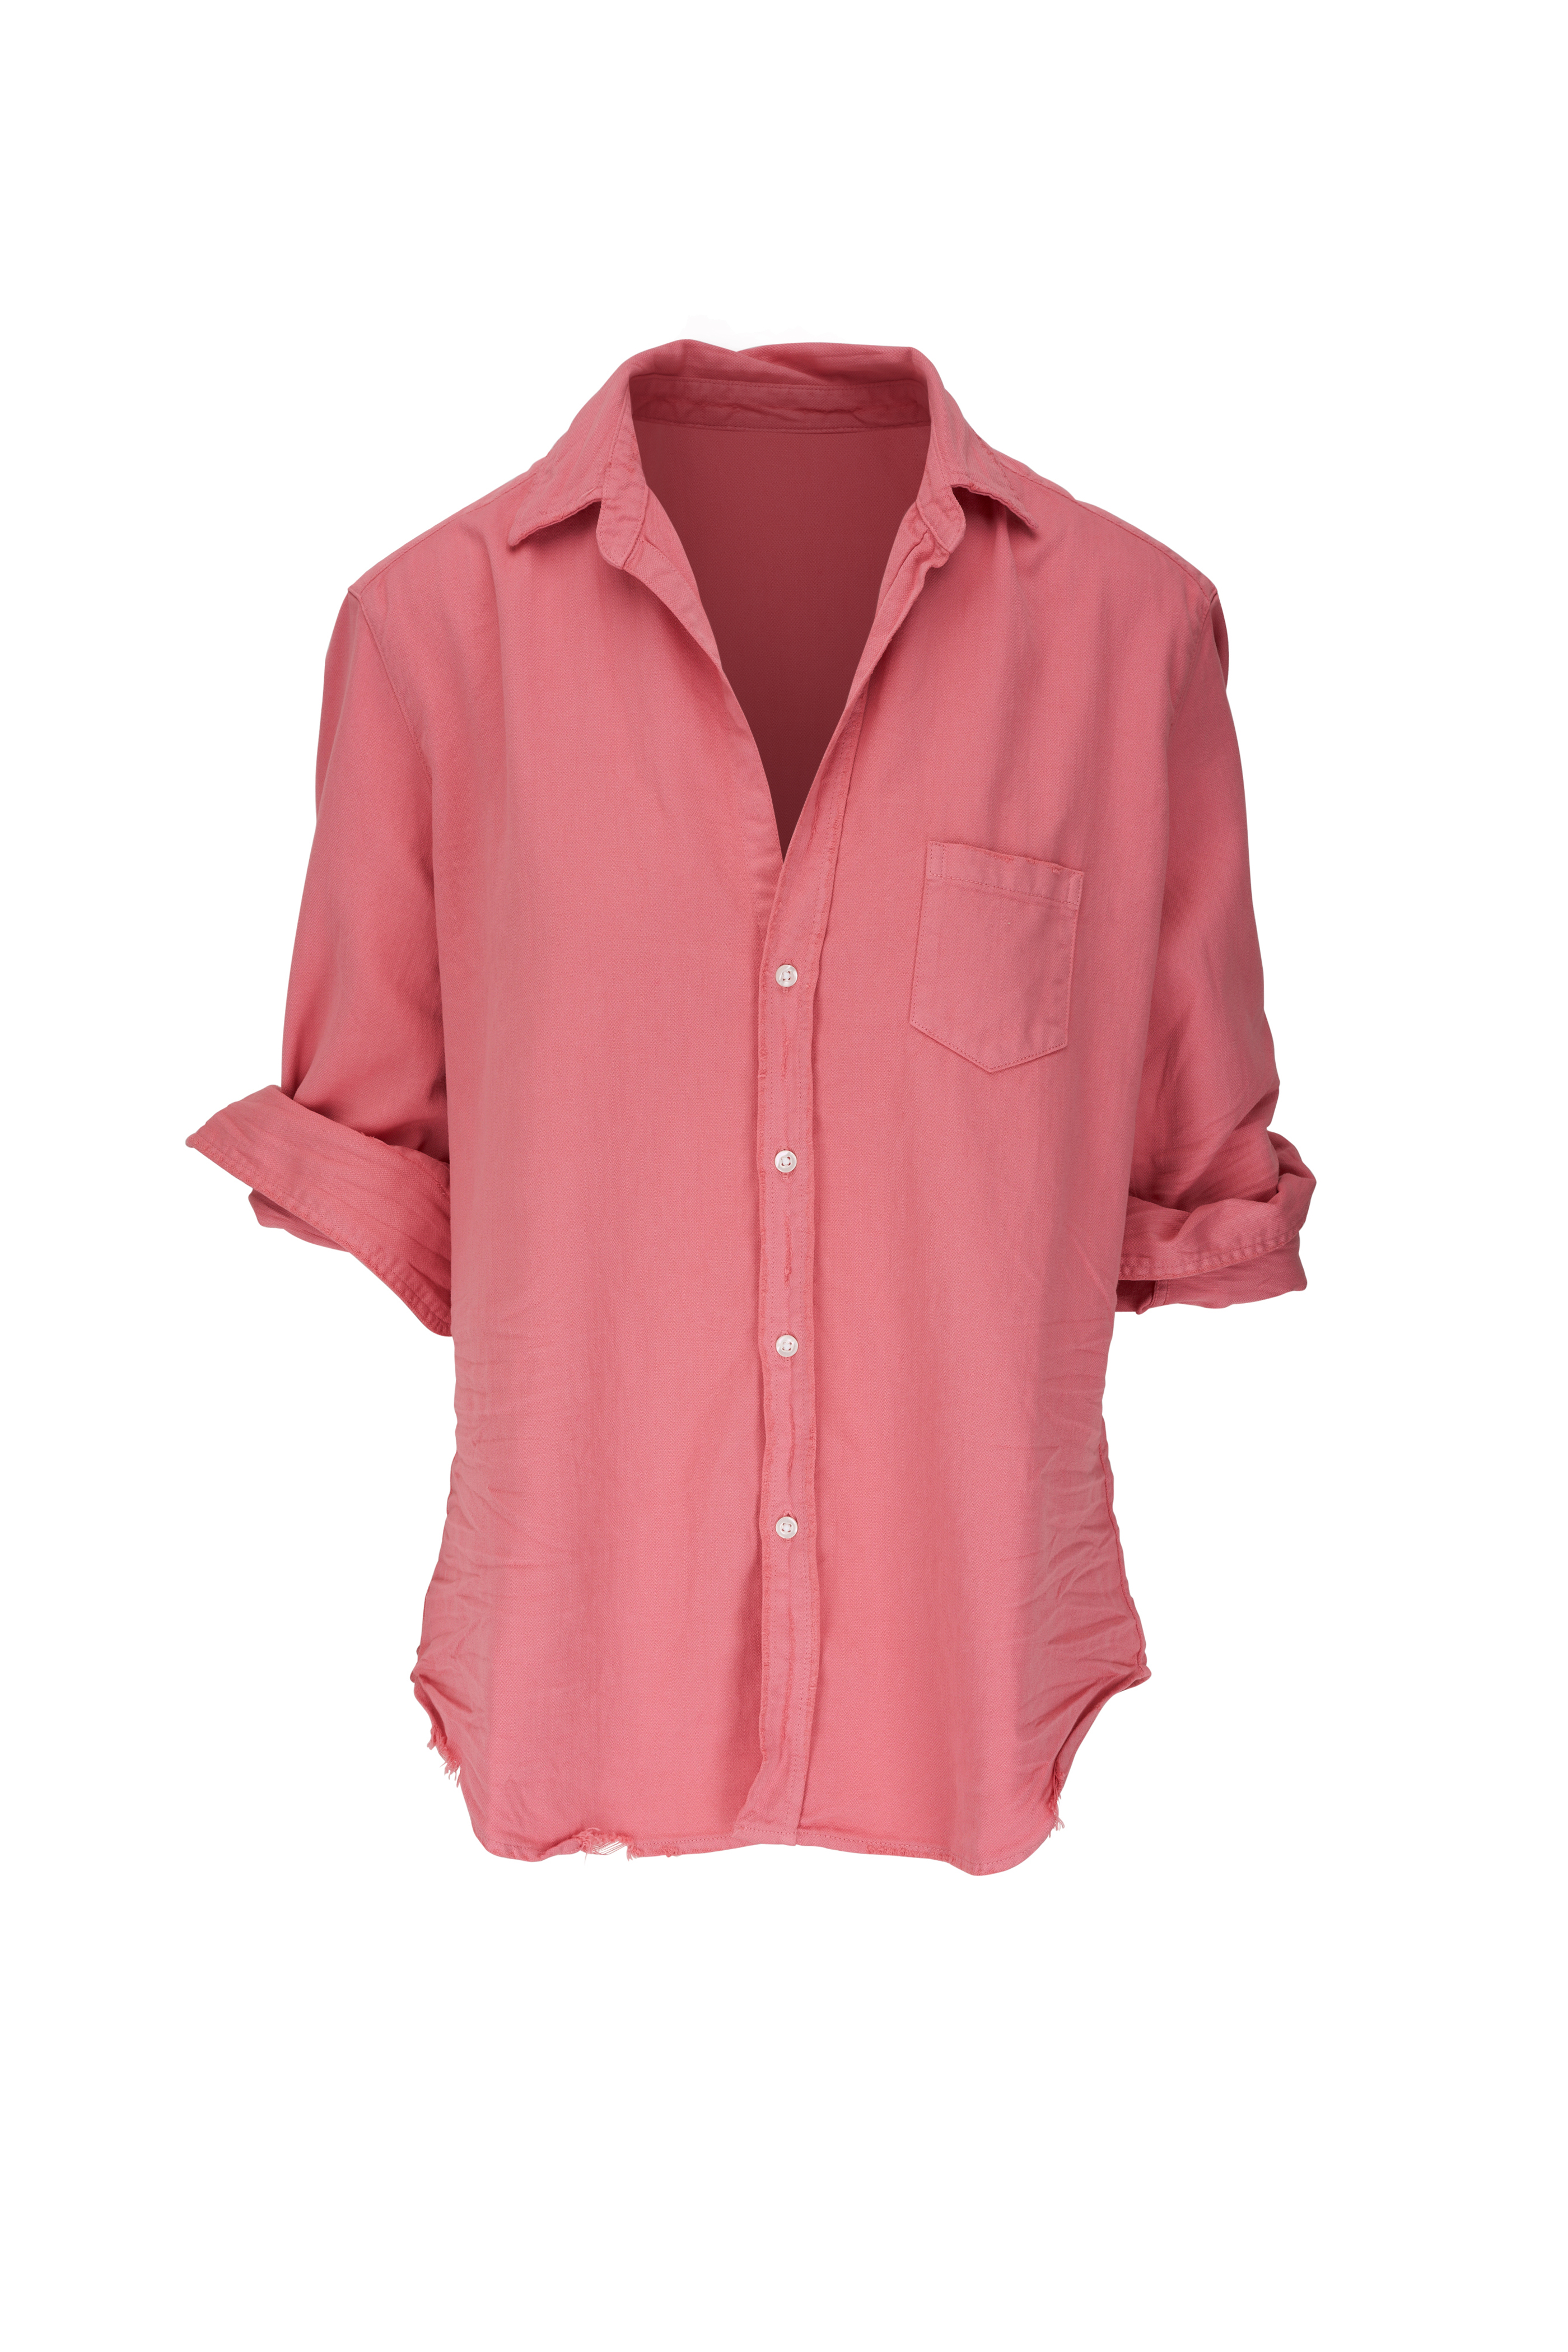 Pink Shirt from to Online Detective Prime Membership Account Linen Womens  Clothing Stuff Under 50 Cents Cheap Swimsuits for Women Under 10 Dollars  Crewneck Sweatshirts Graphic Daily Deals of at  Women's